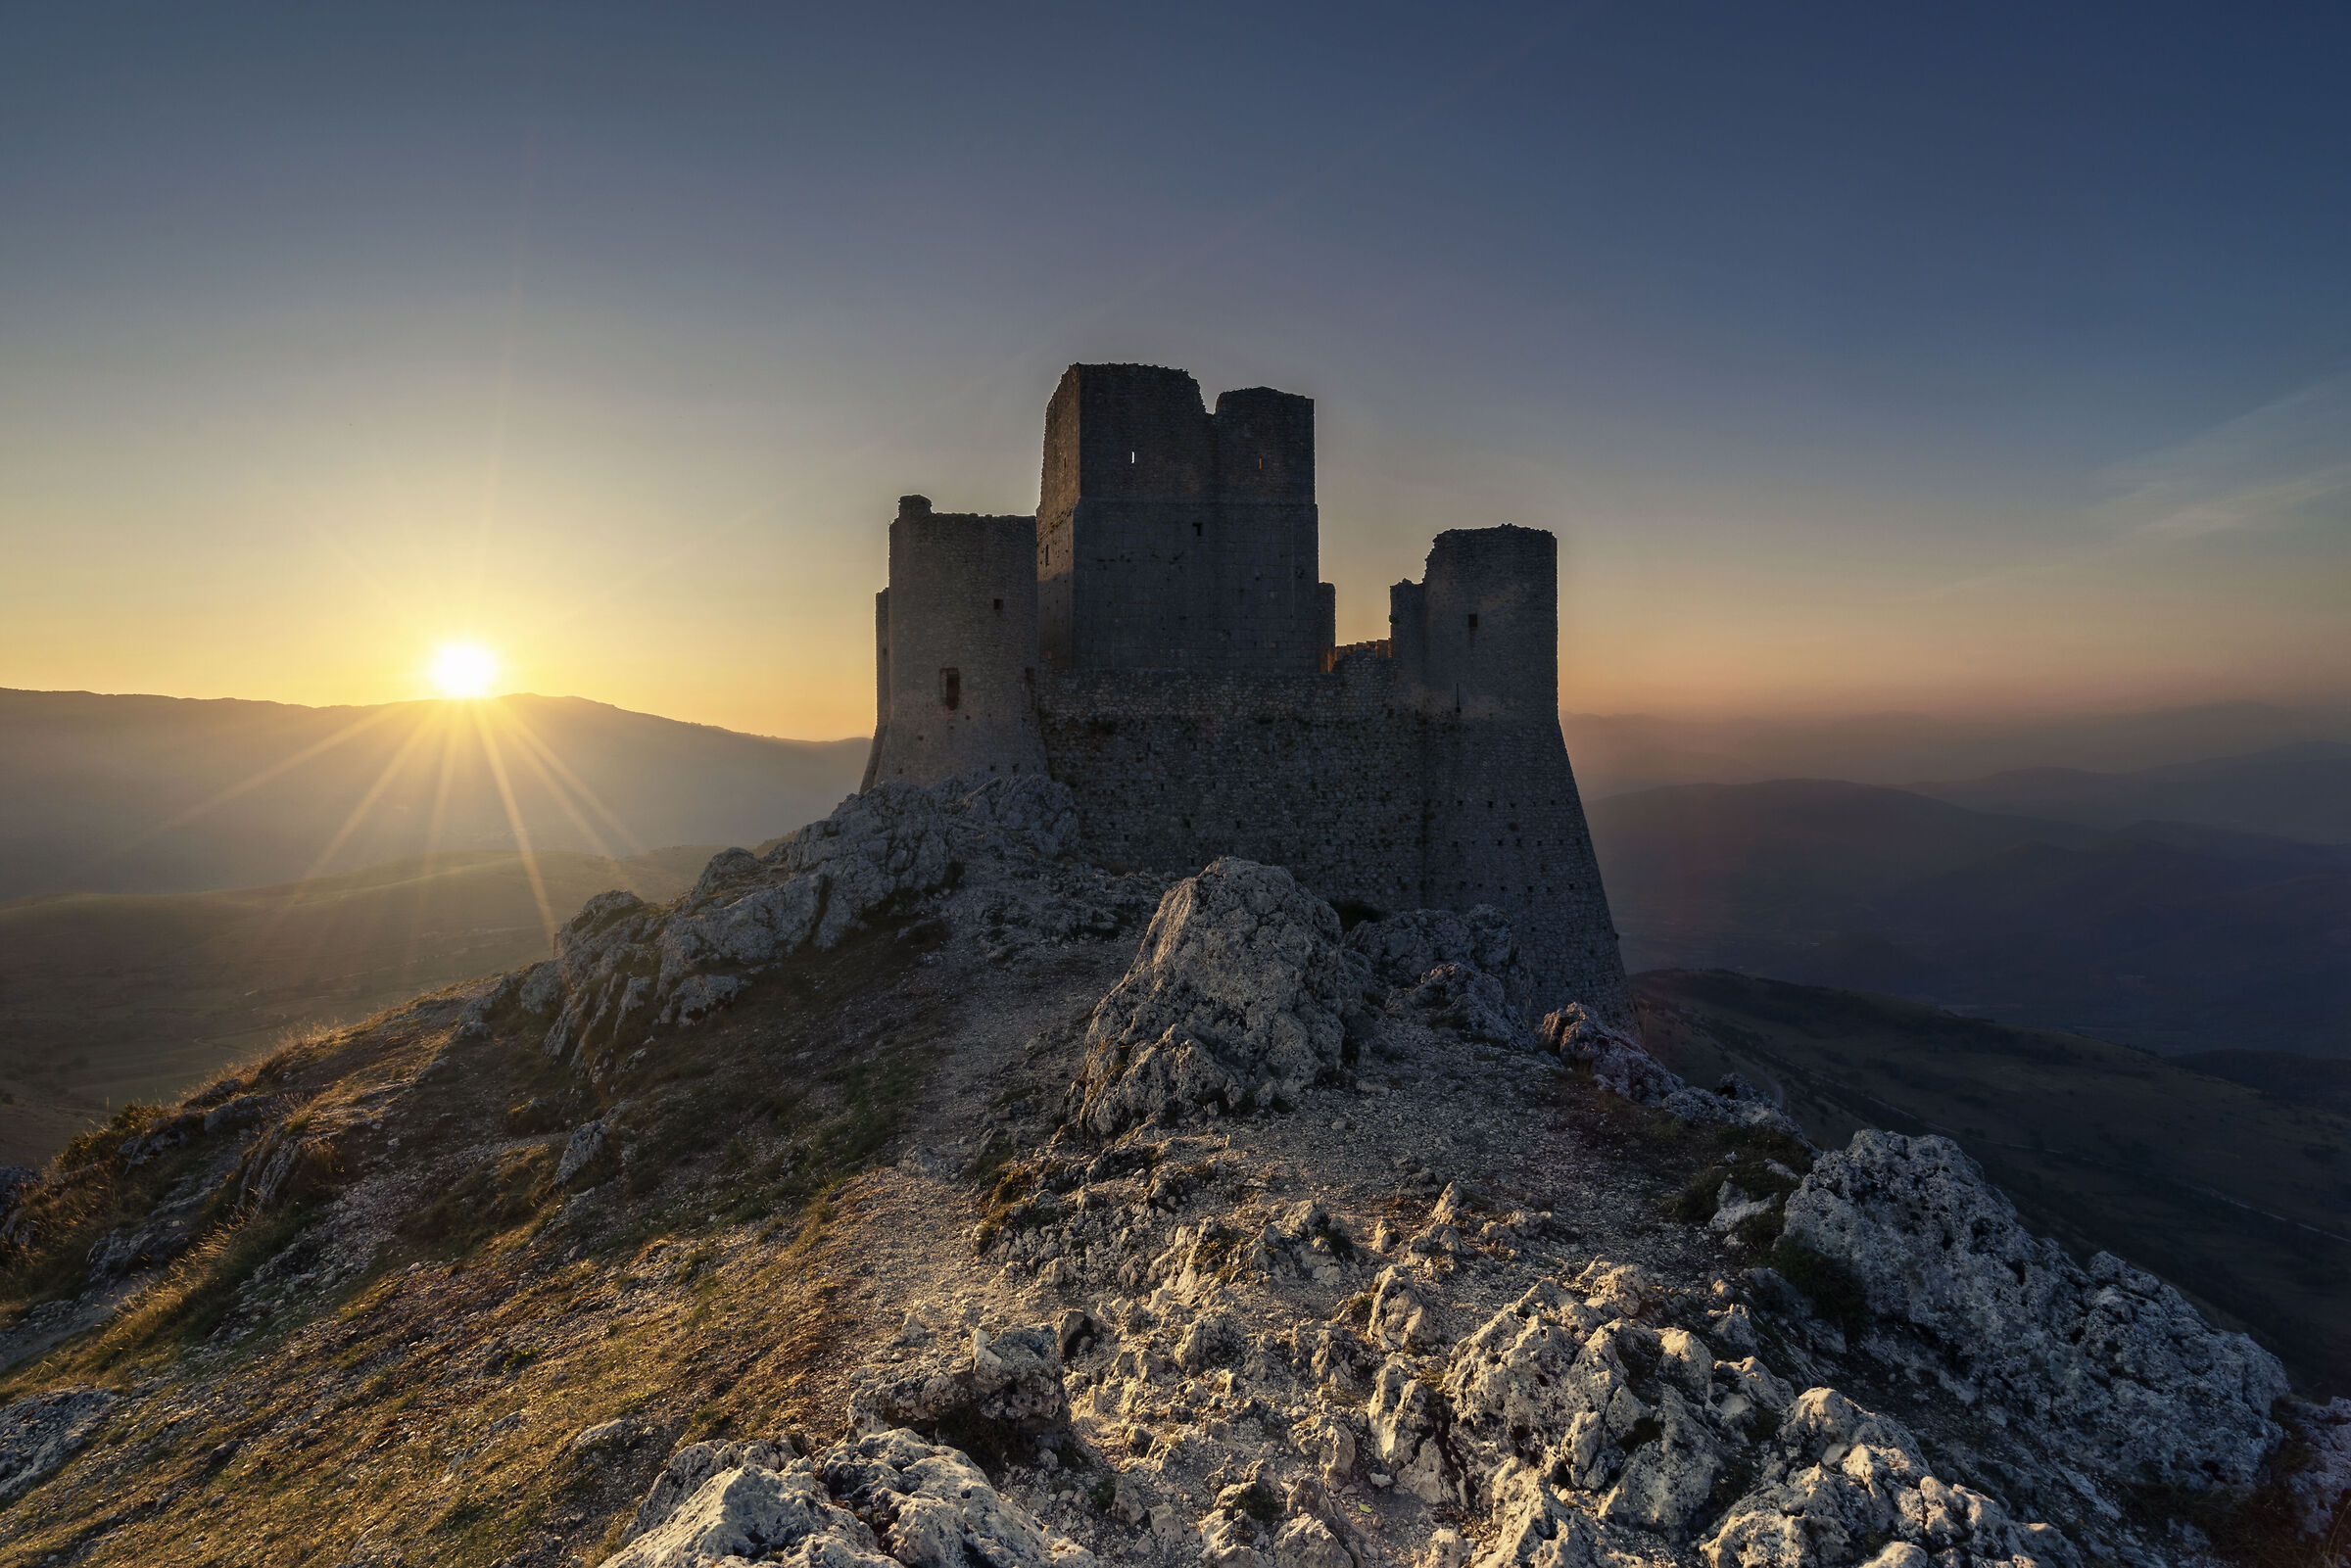 Sunrise at the fortress...